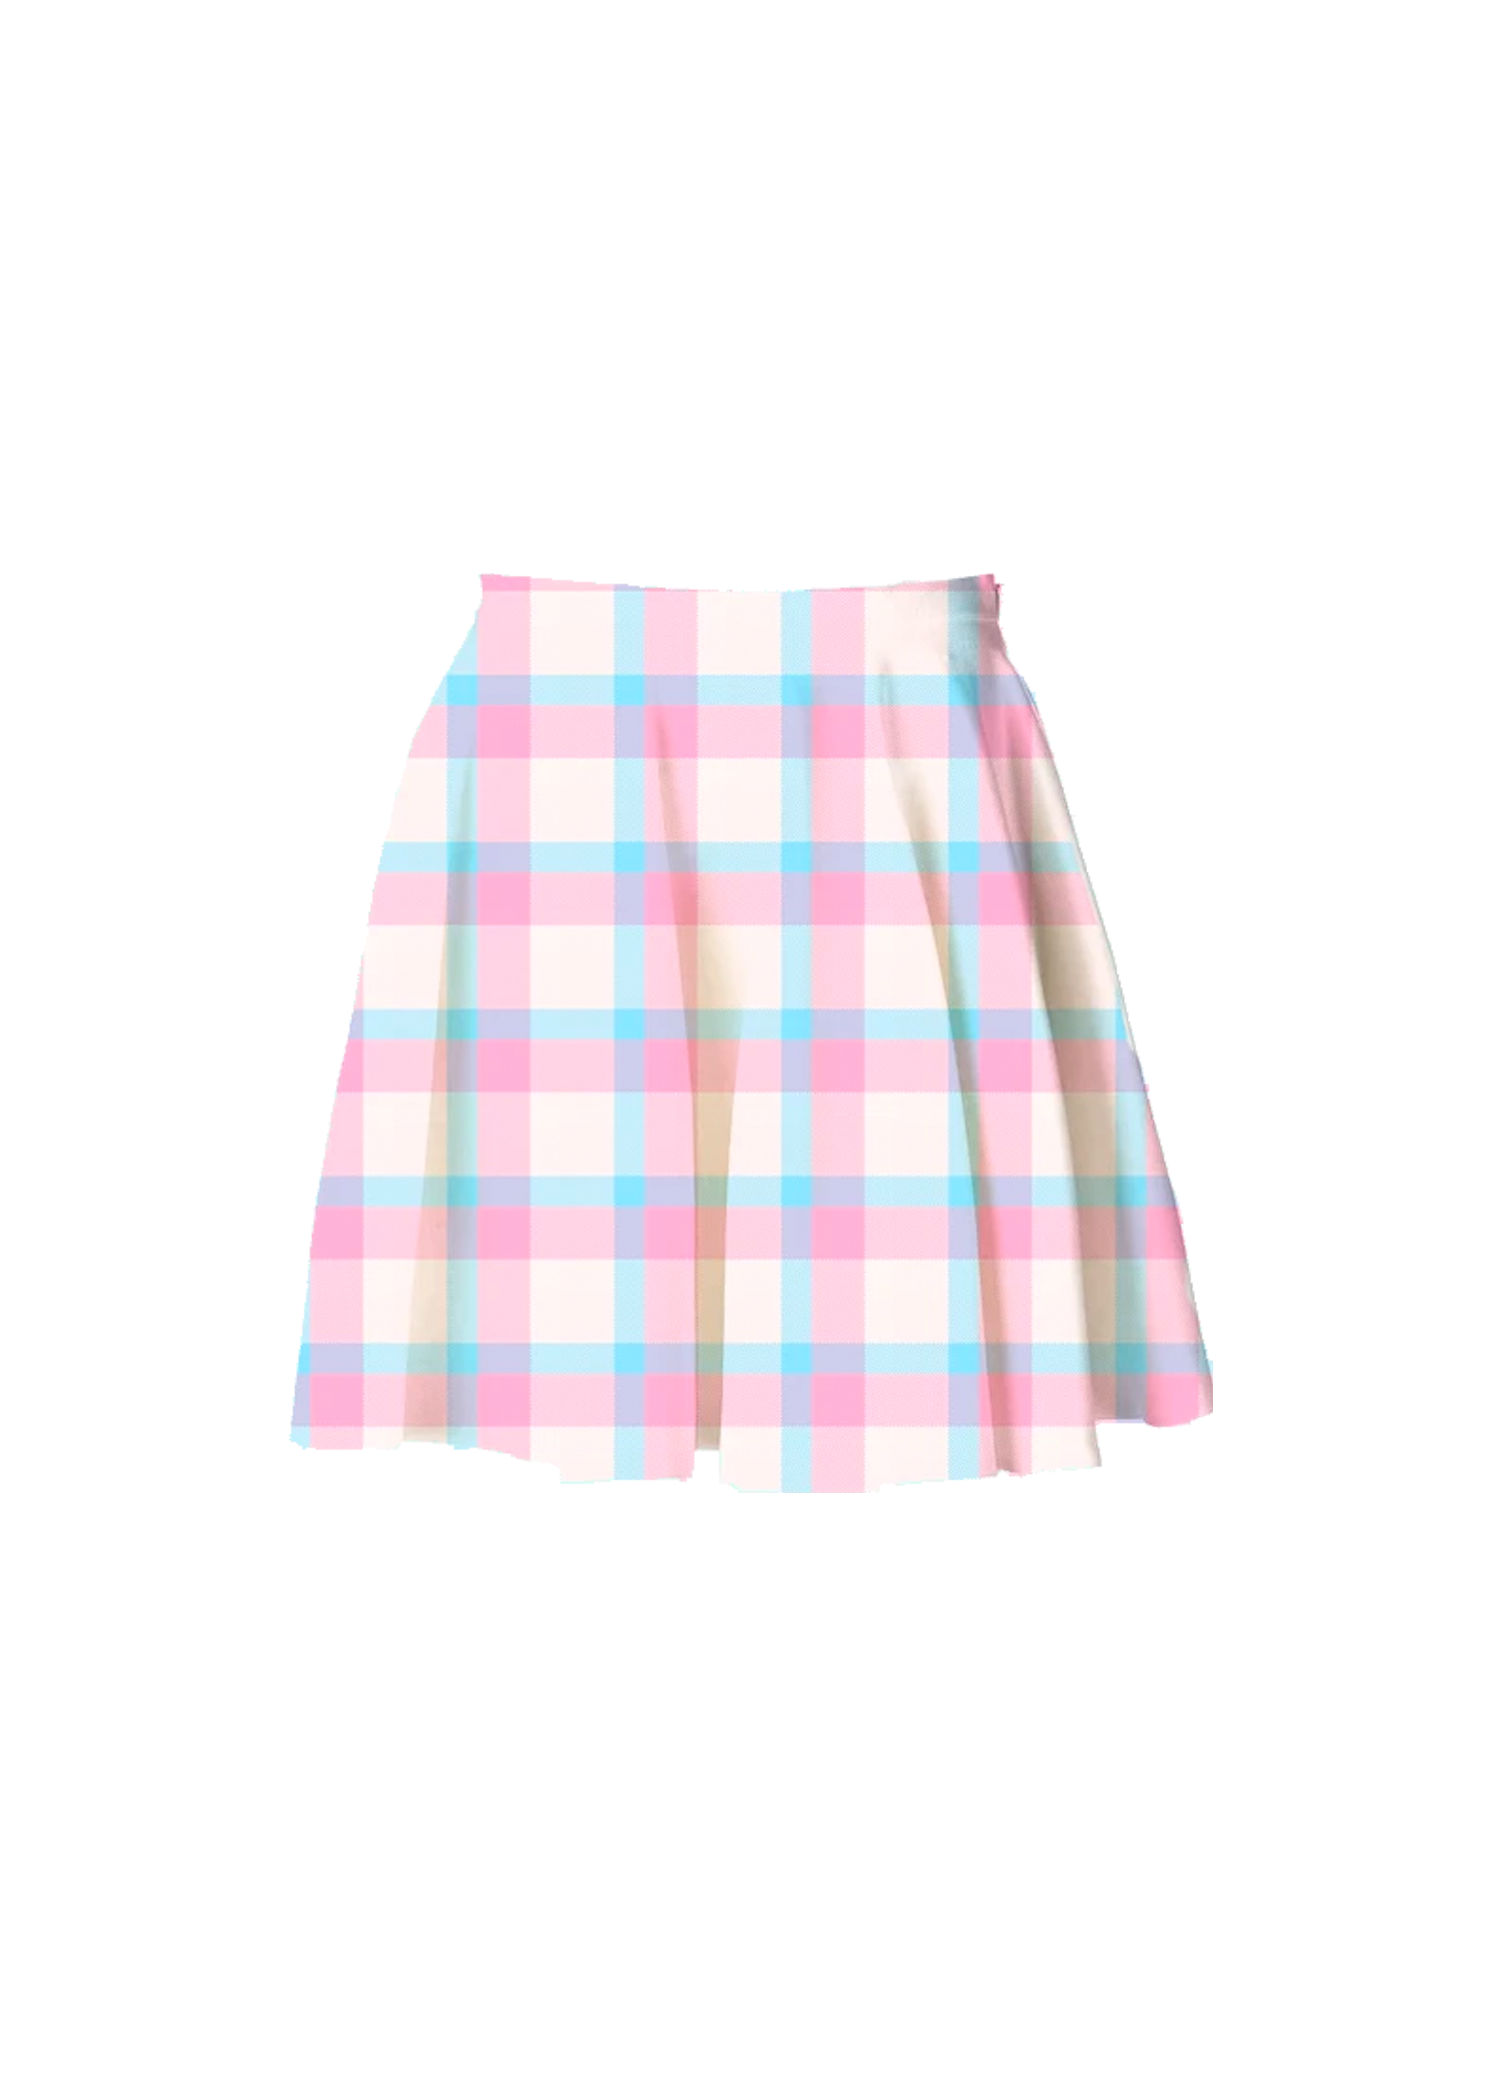 Purchase \u003e pink plaid skirt queen, Up 